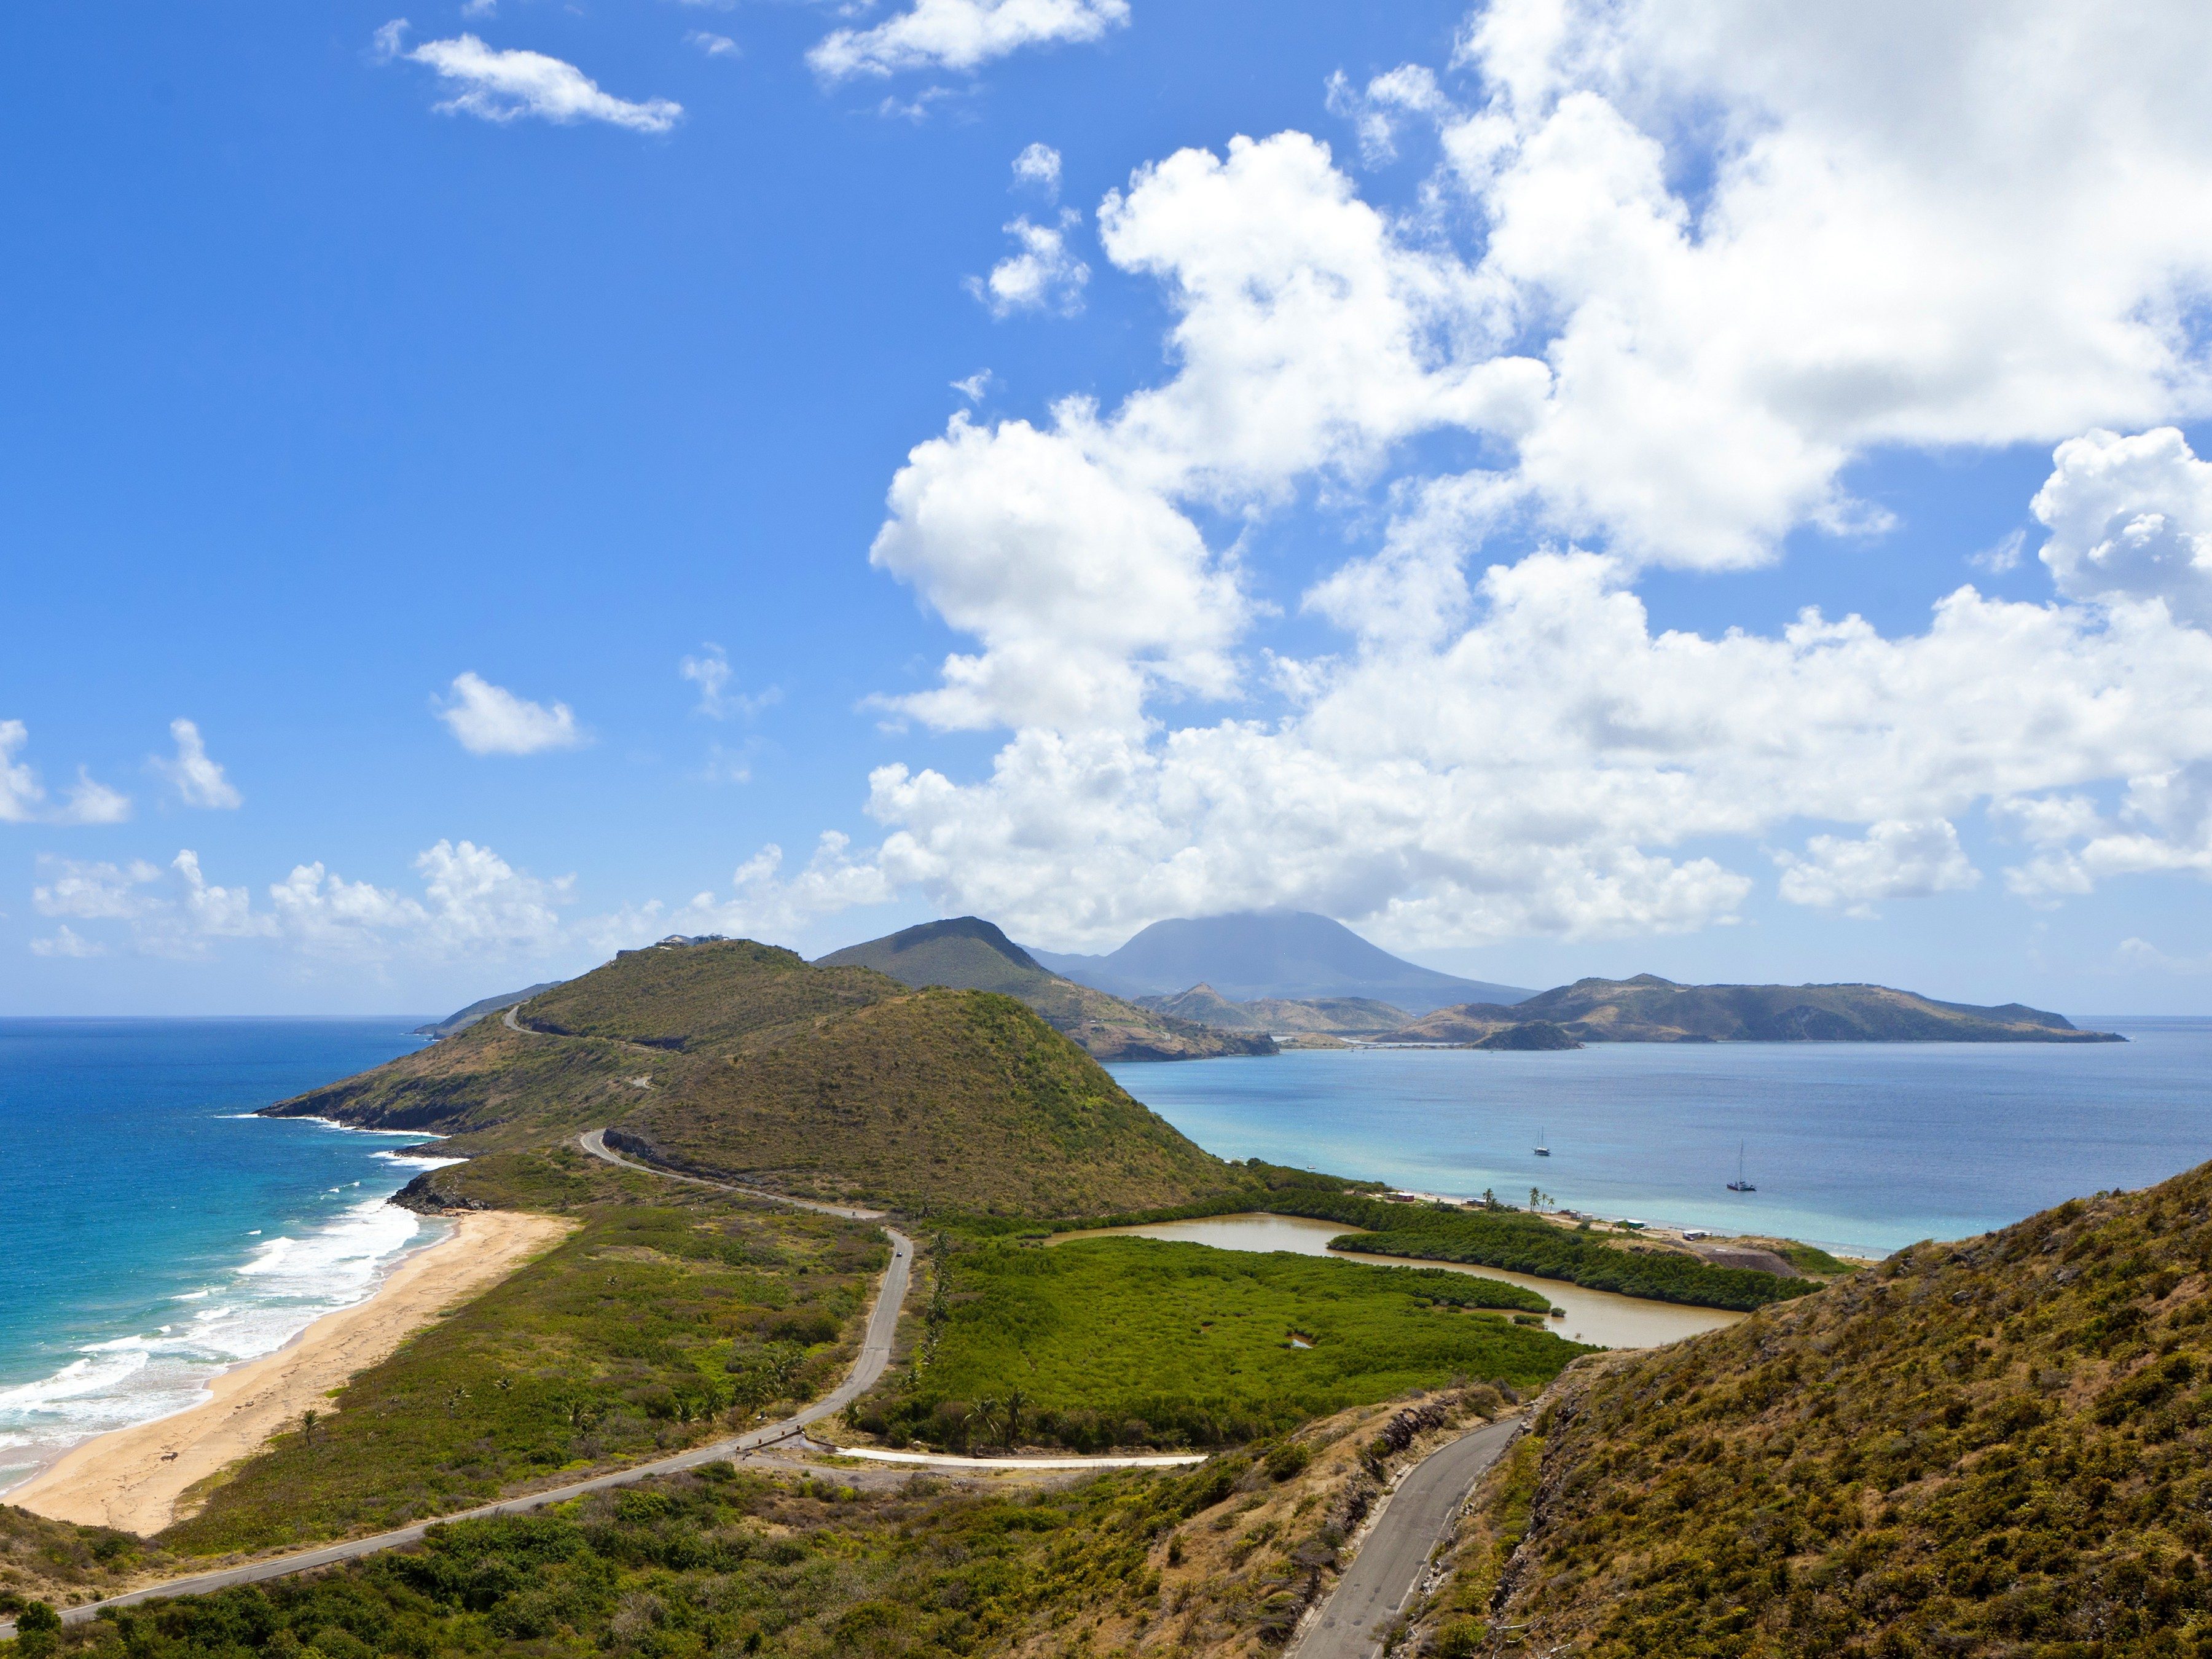 World's 10 Sexiest Places: St. Kitts, the Caribbean